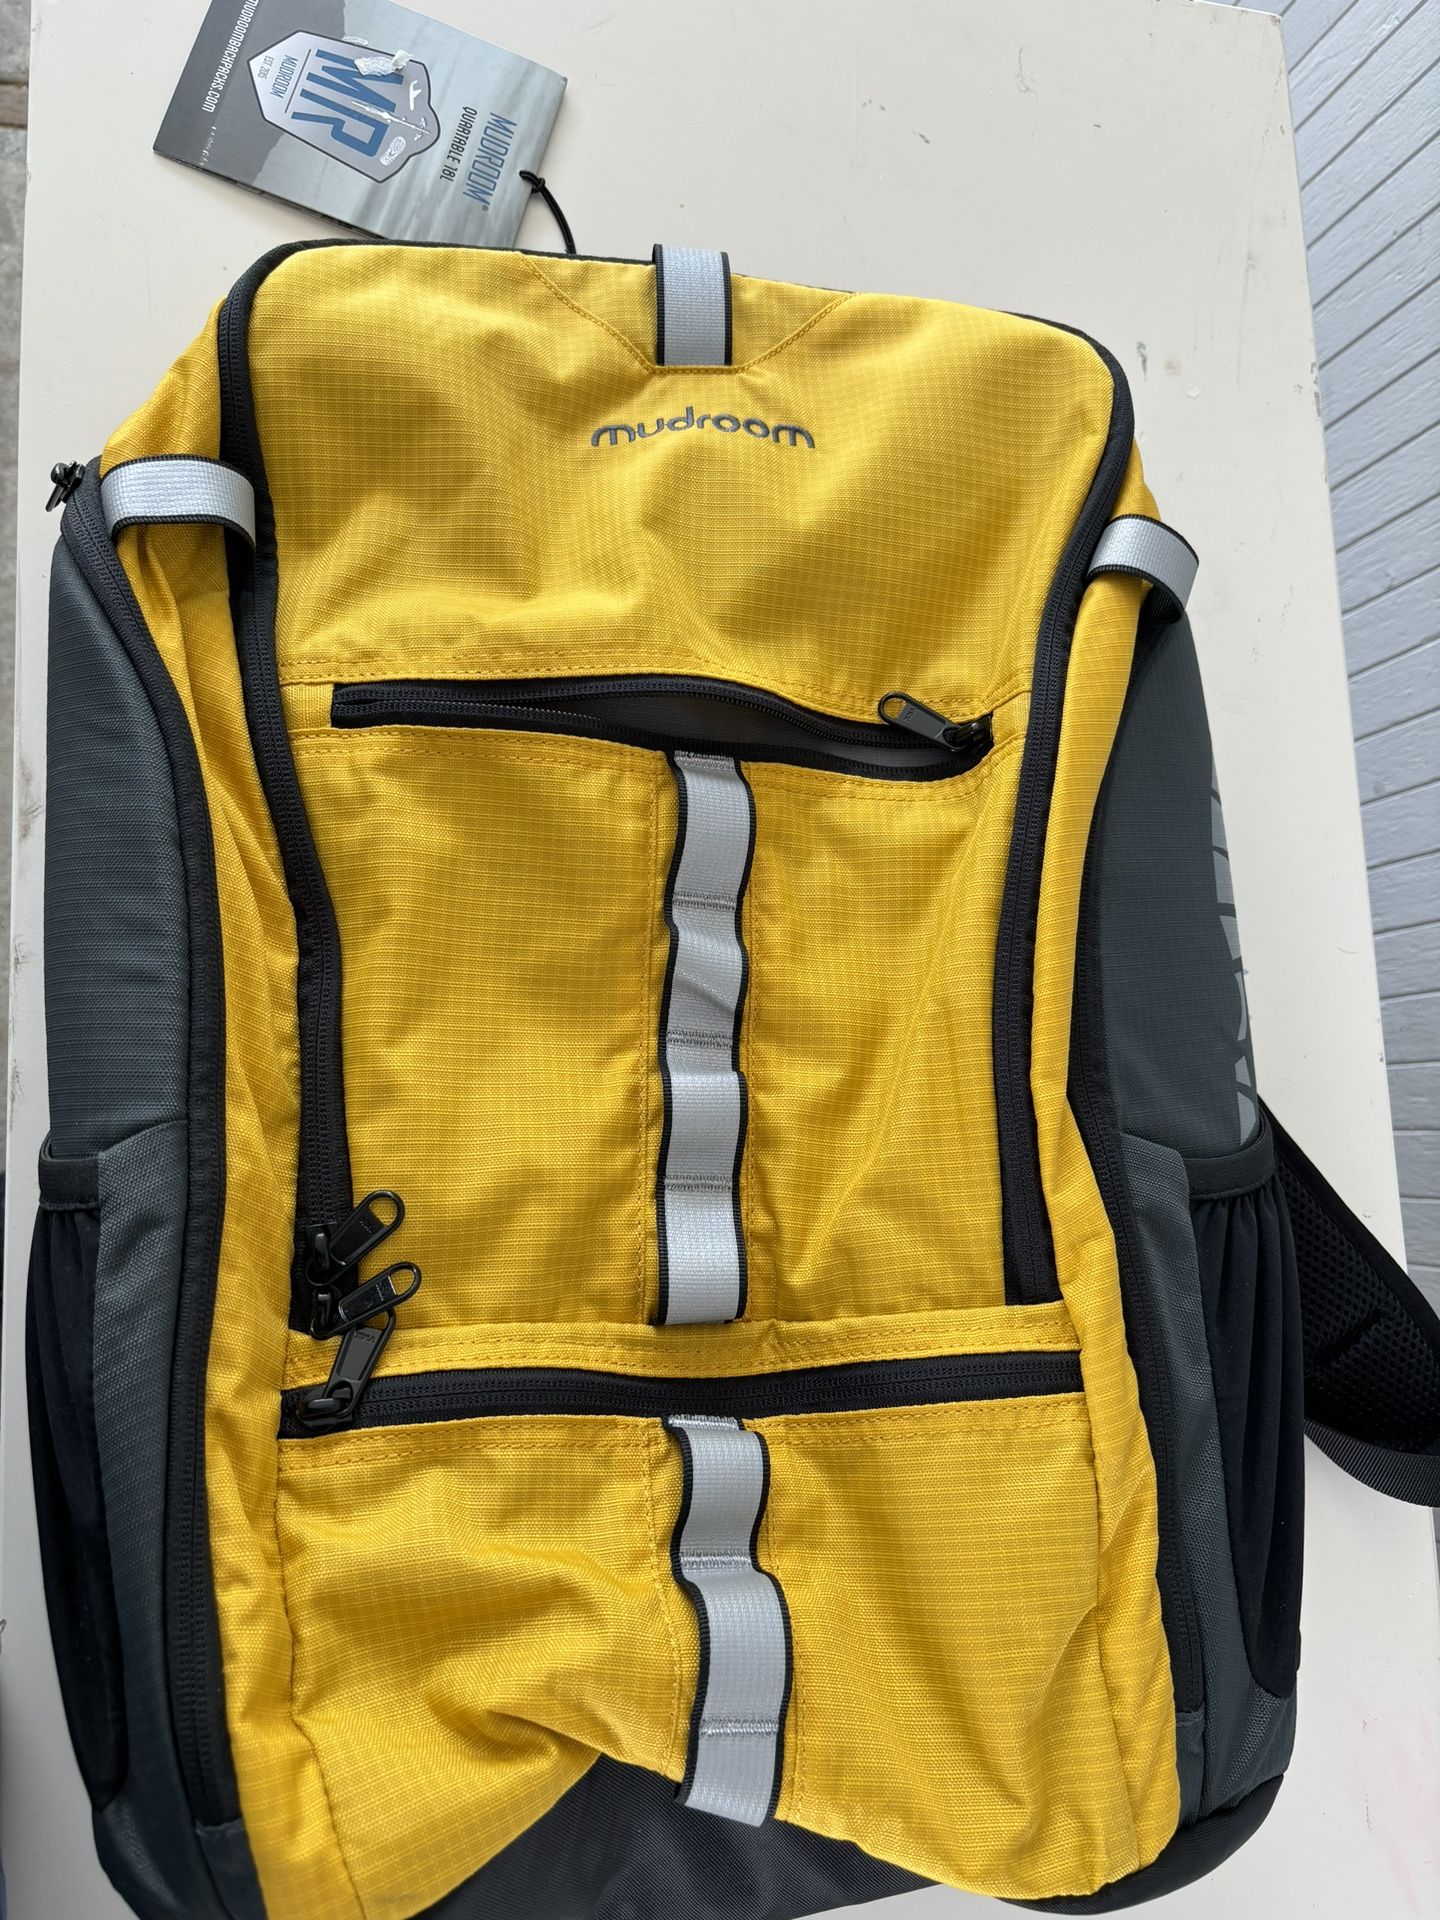 Mudroom QUARTABLE 18L backpack new w tags  MR1003-18L (Yellow) paid 120 last year 